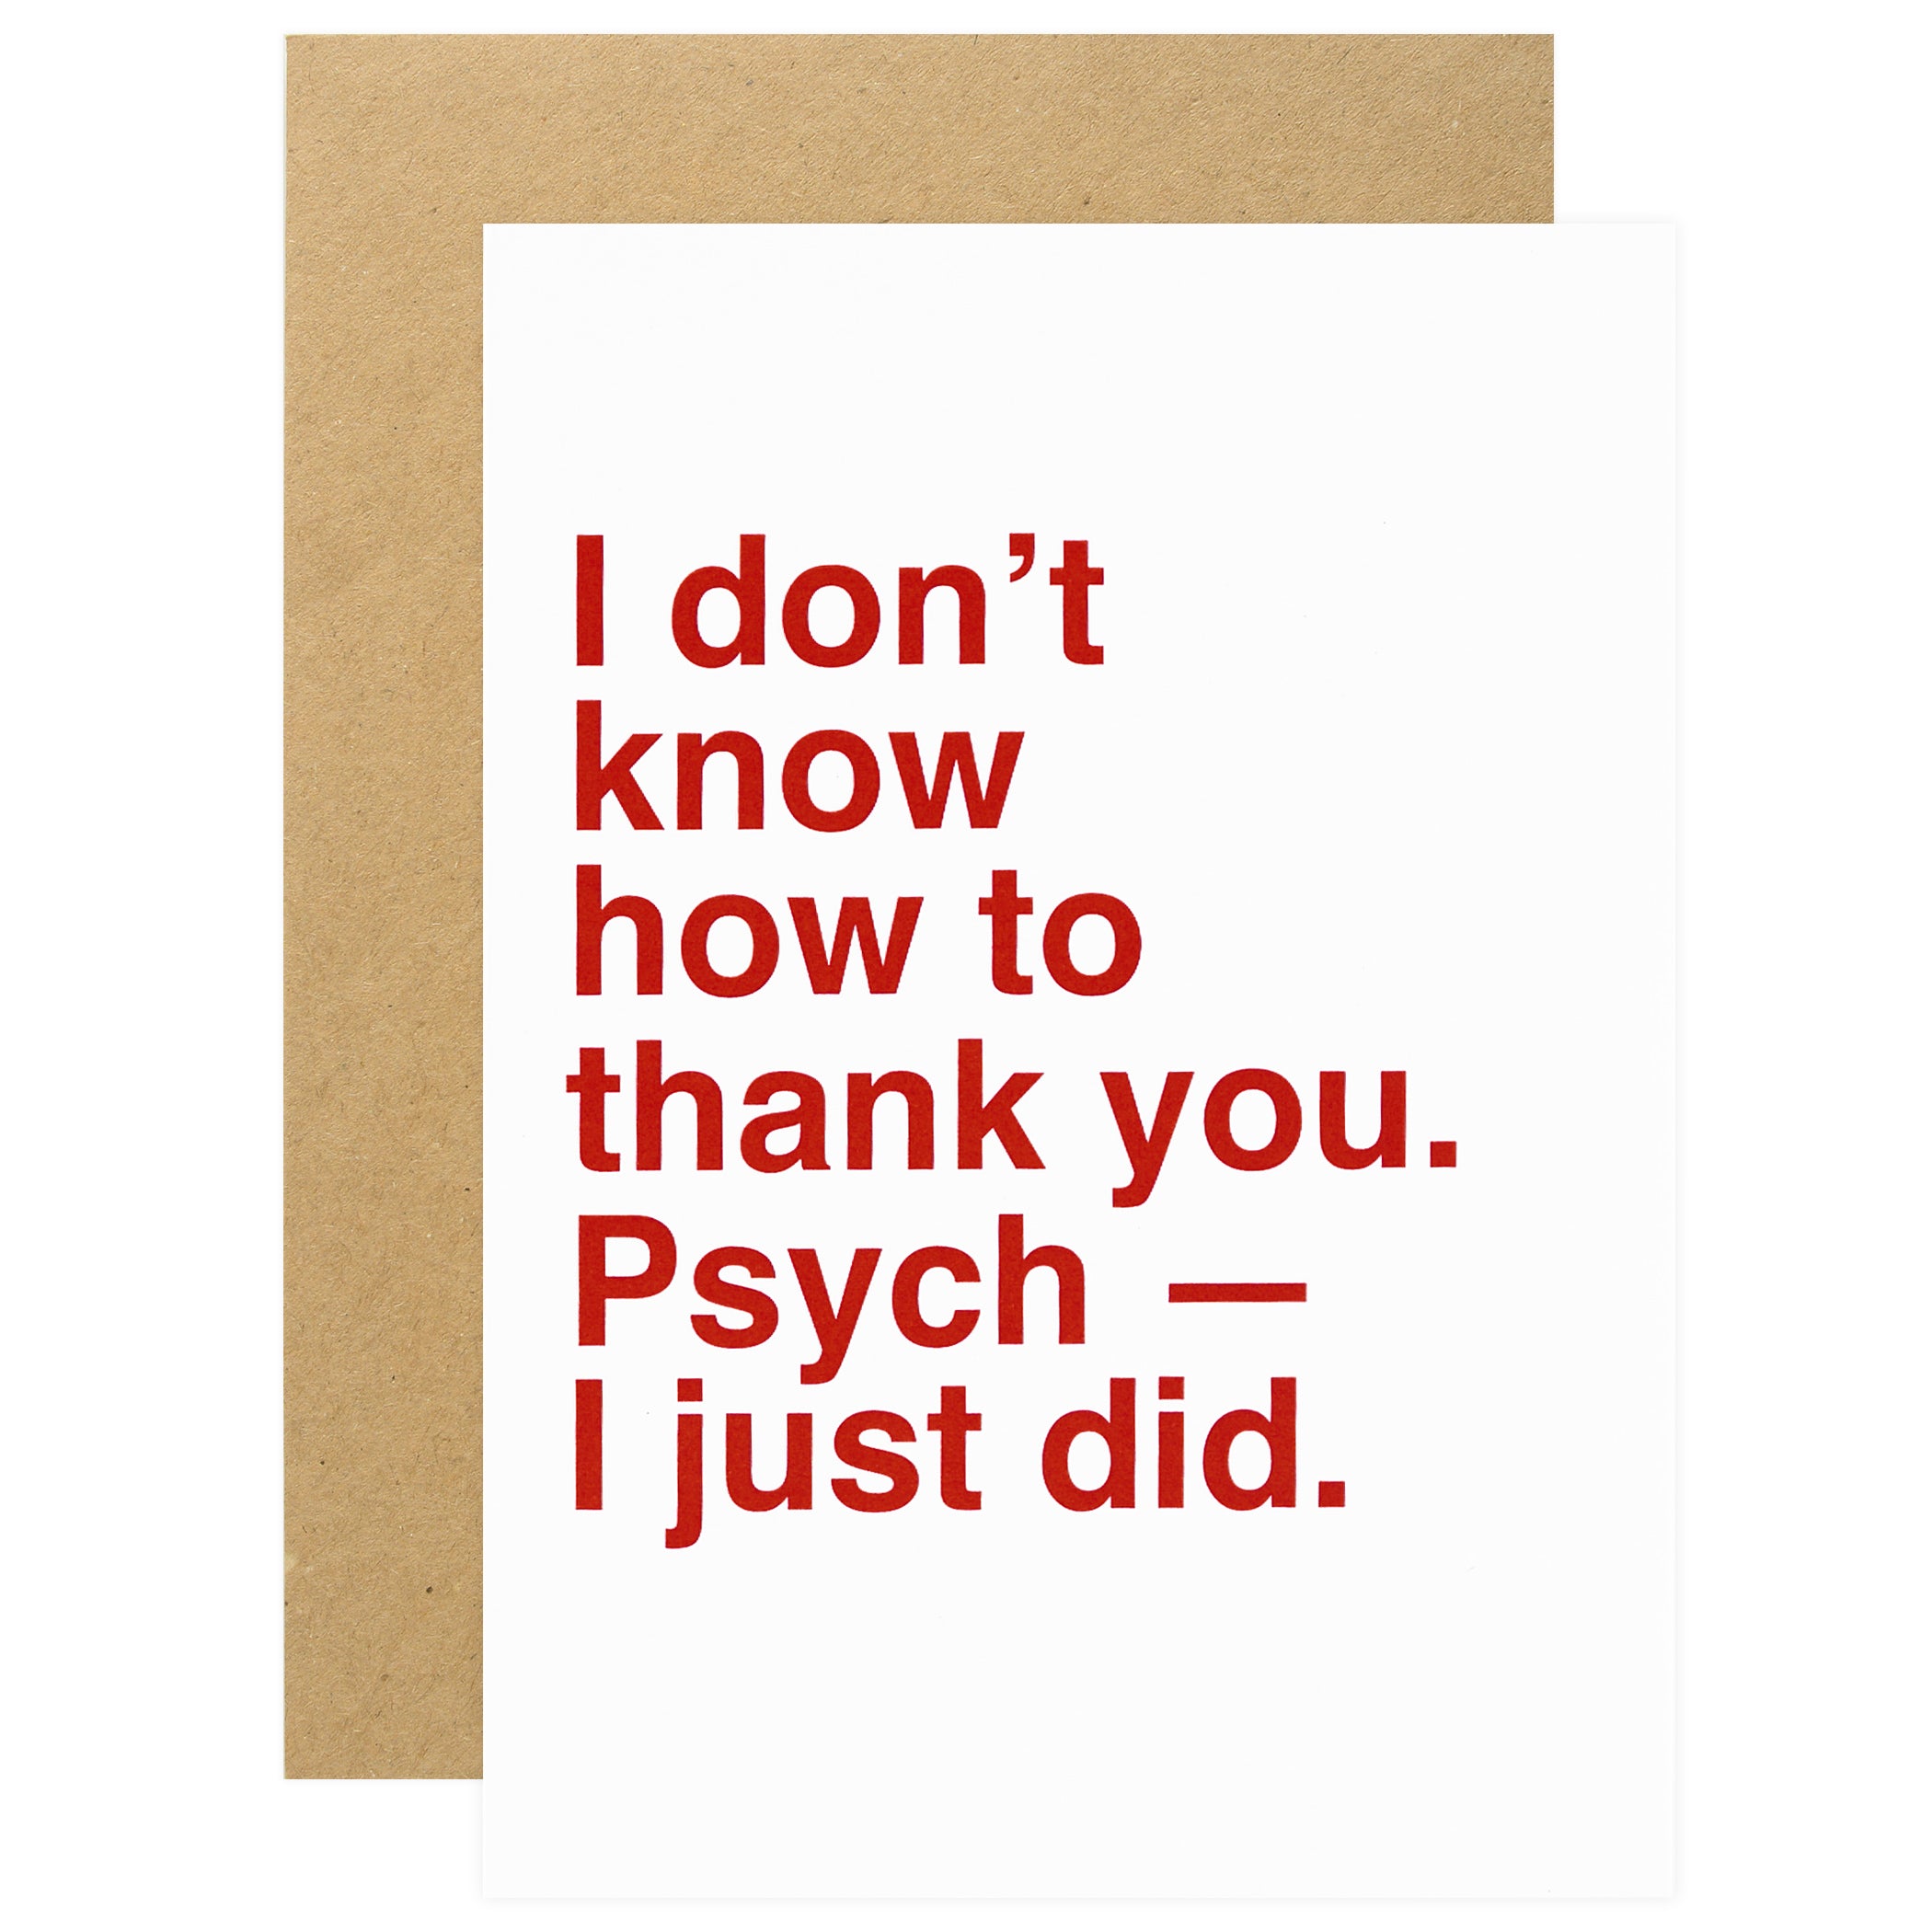 I Don't Know How to Thank You. Psych - I Just Did Greeting Card